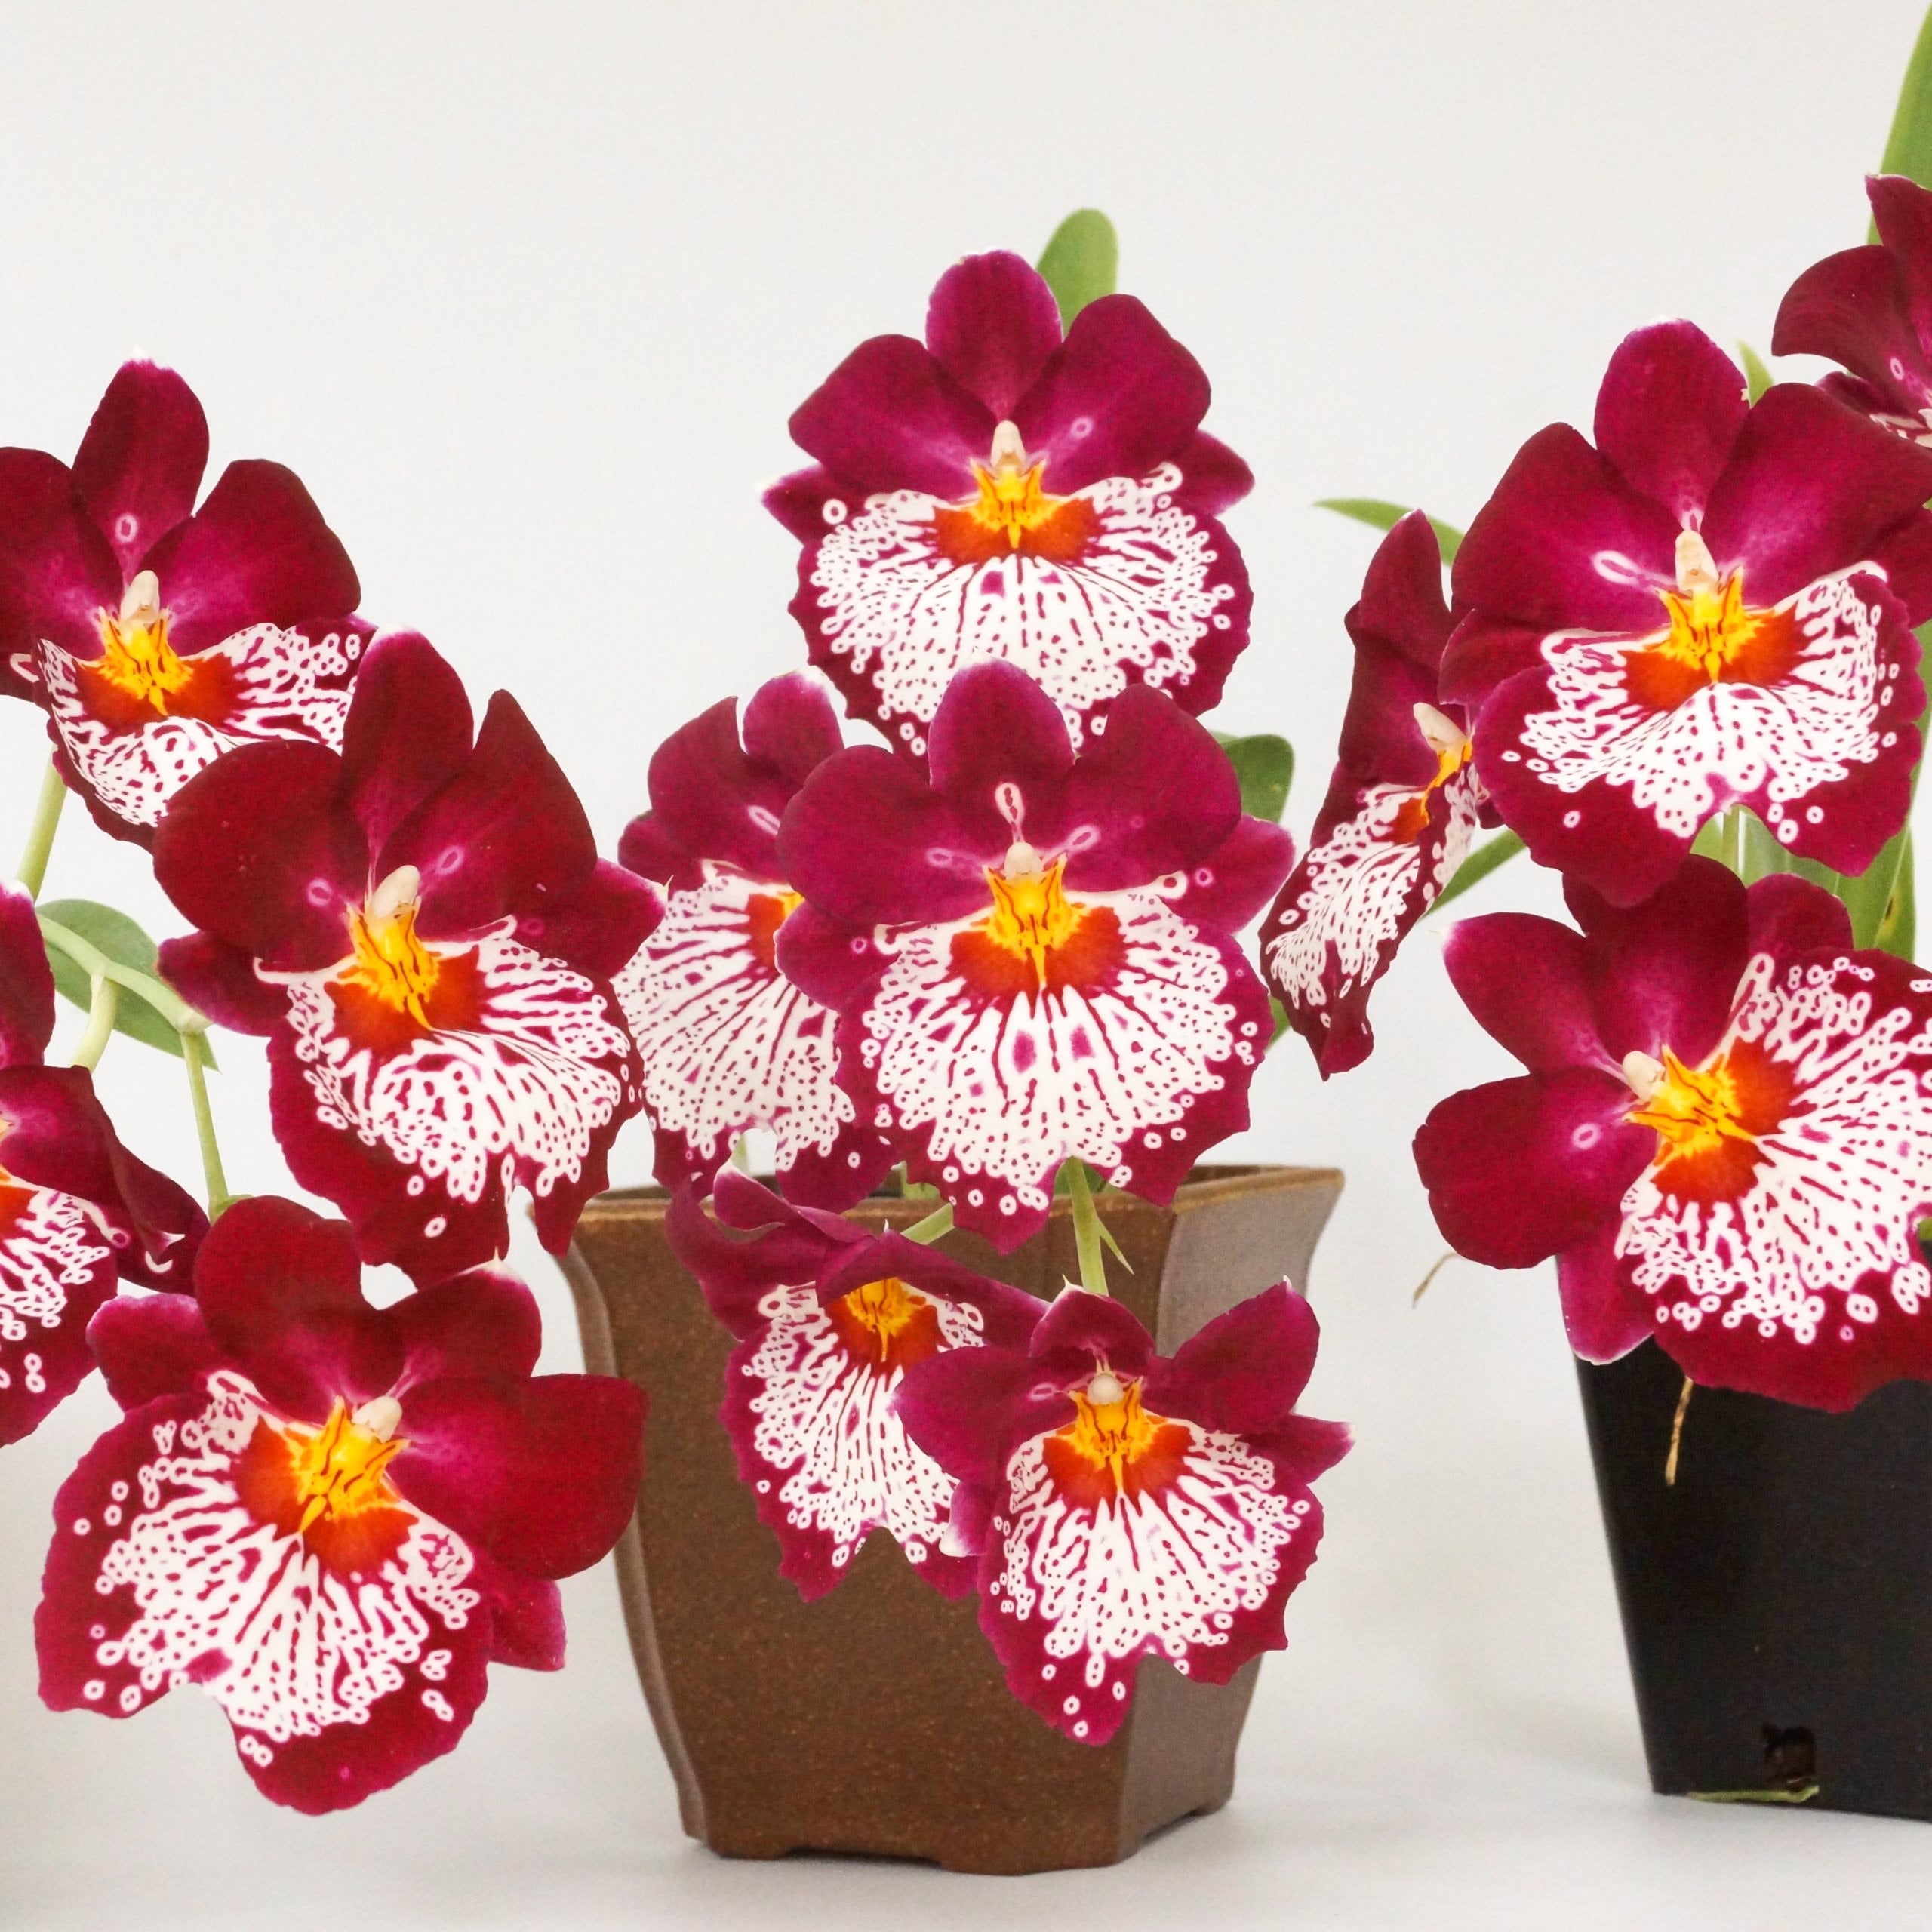 Fragrant Pansy Orchid Miltoniopsis Breathless 'Good Woman' IN SPIKE